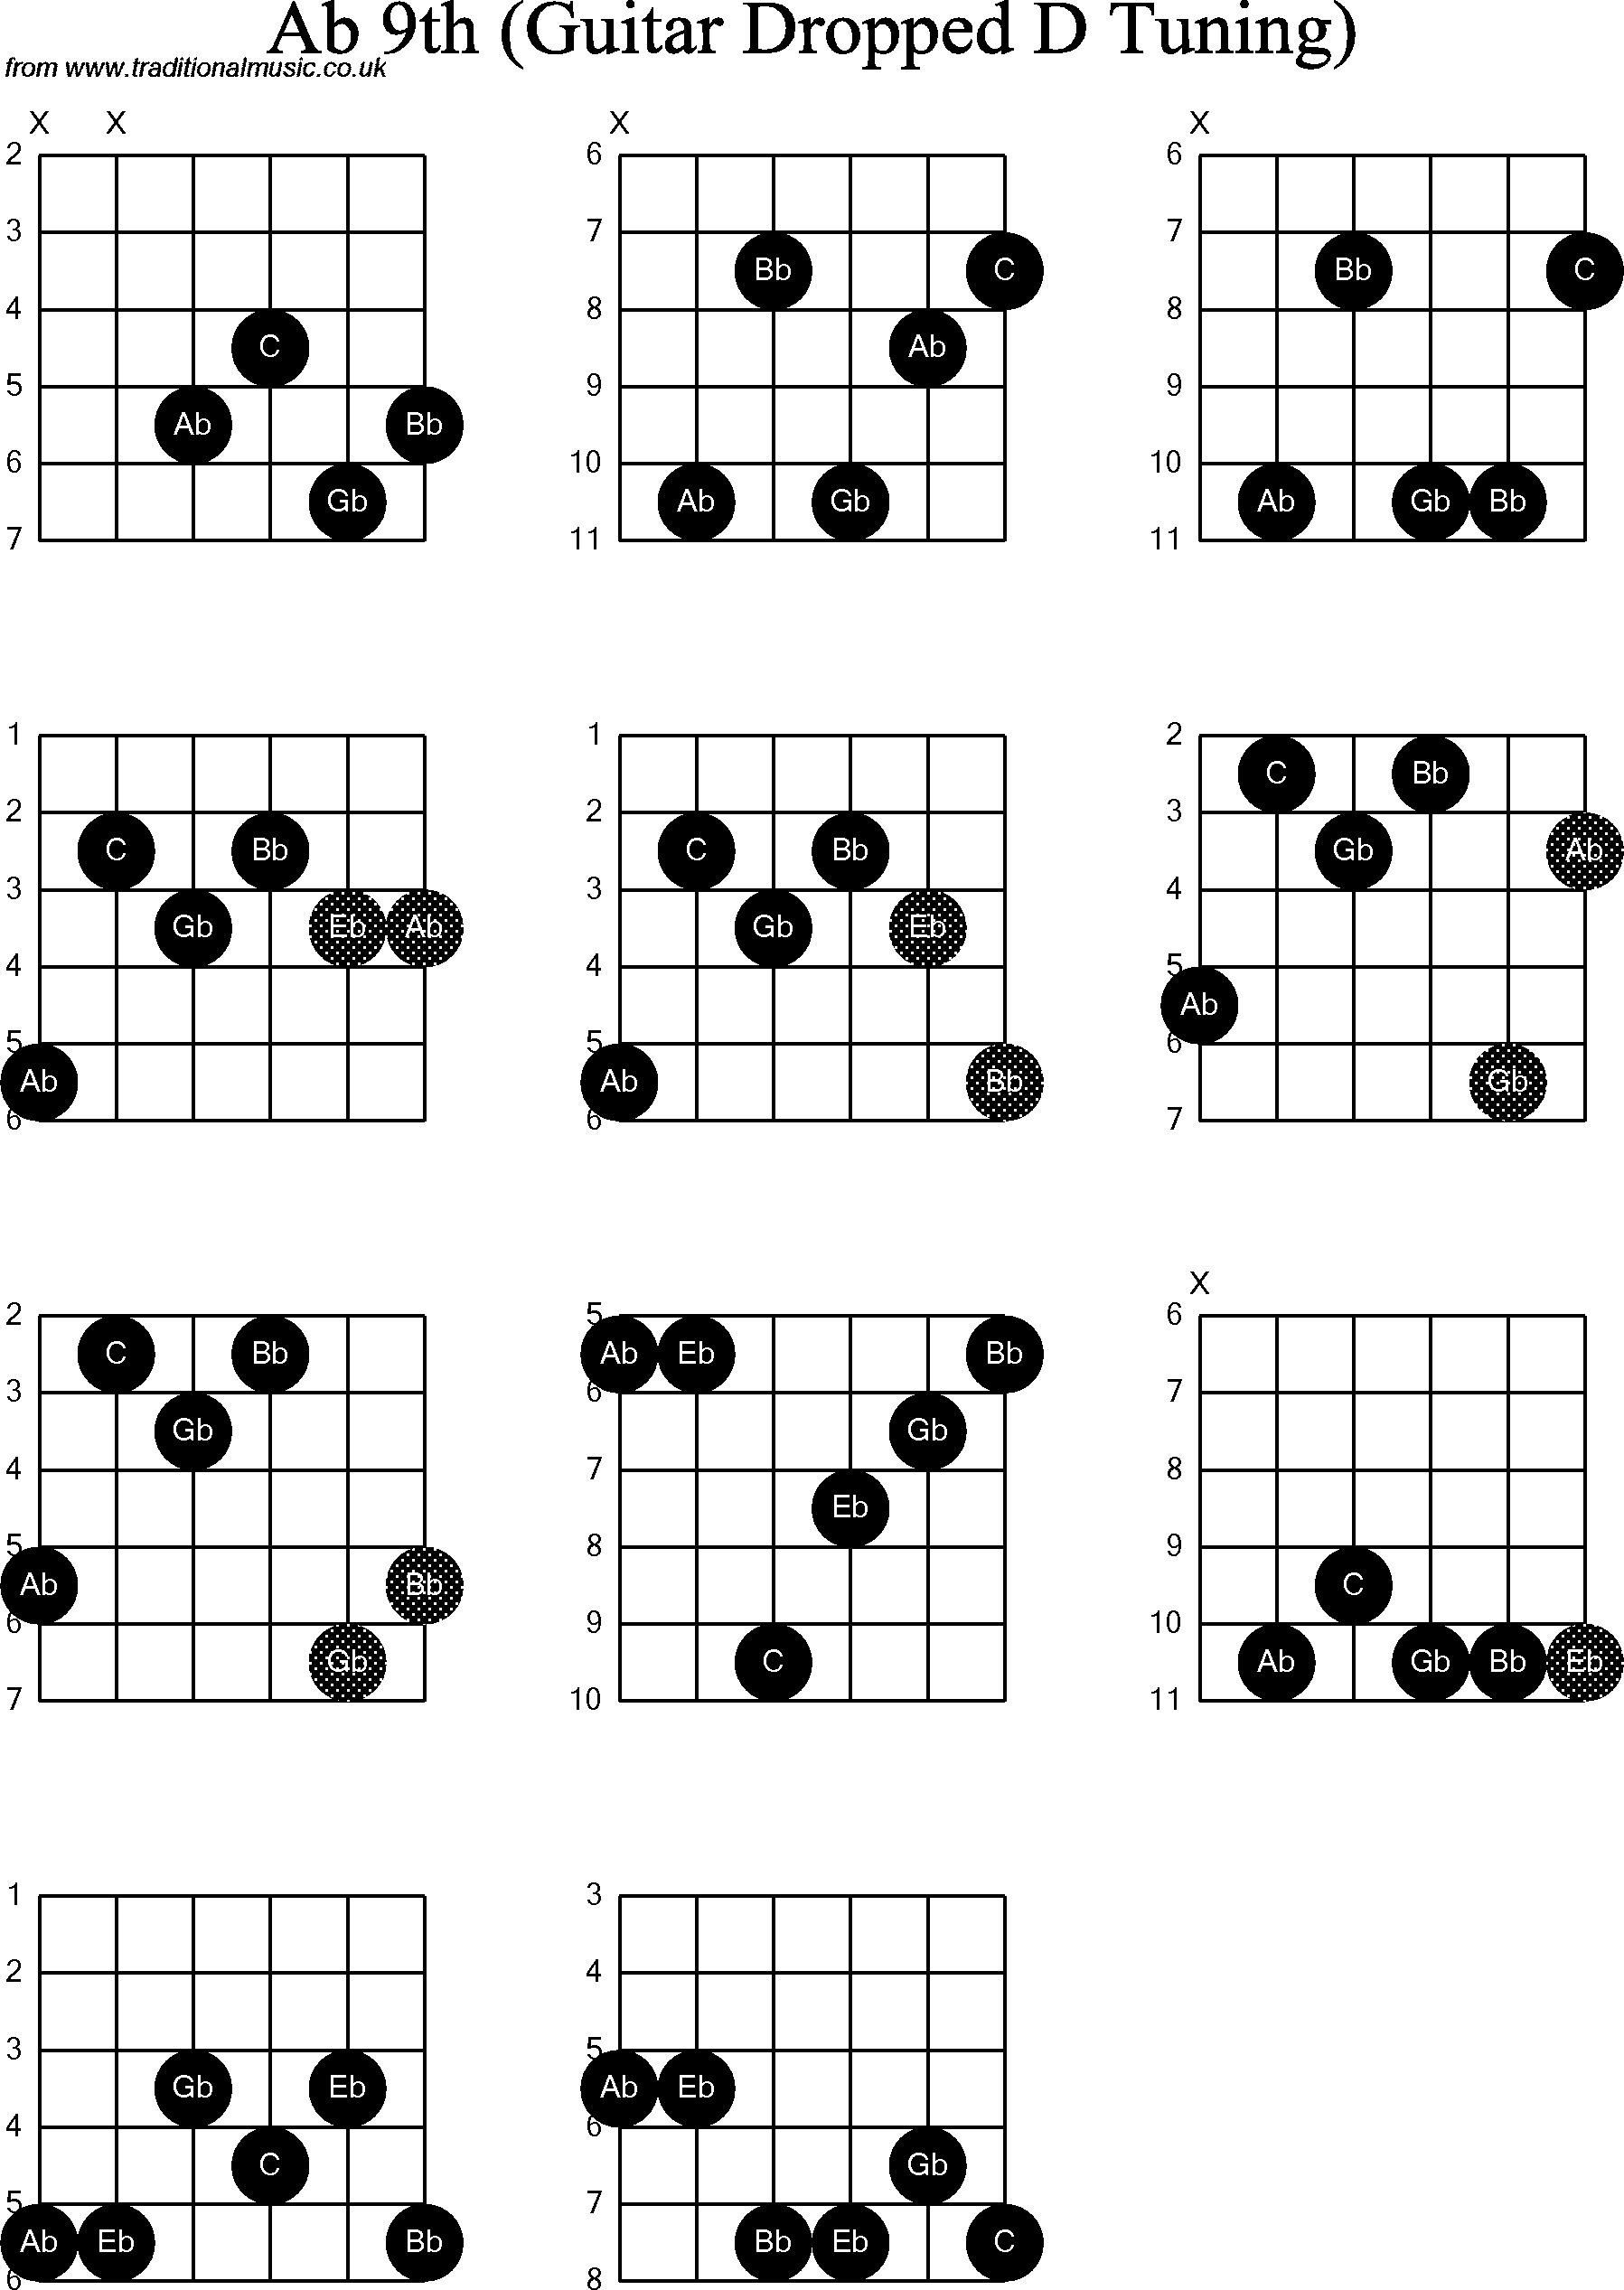 Chord diagrams for dropped D Guitar(DADGBE), Ab9th